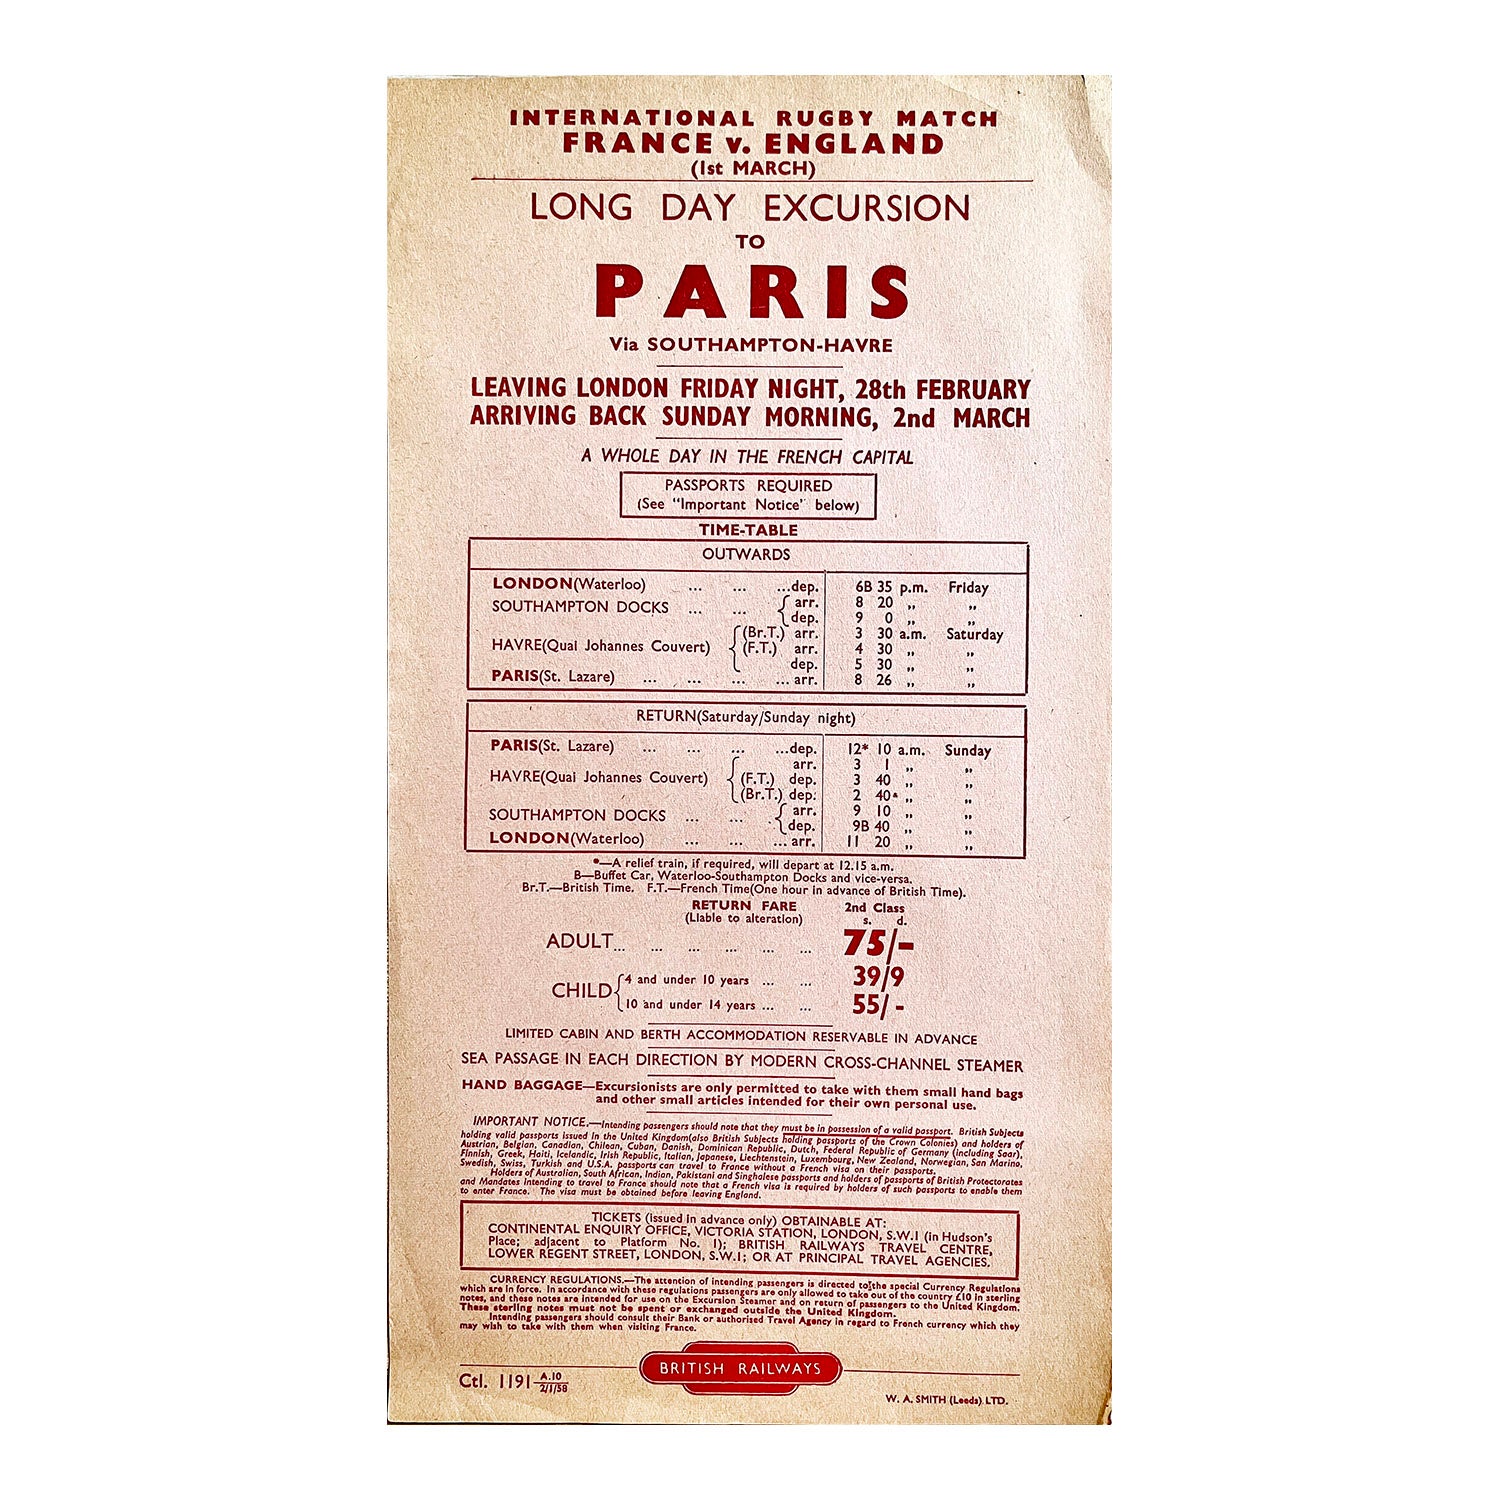 Original British Railways handbill advertising a trip from London to Paris to watch the Five Nations Championship (rugby) England v France, 1st March 1958.